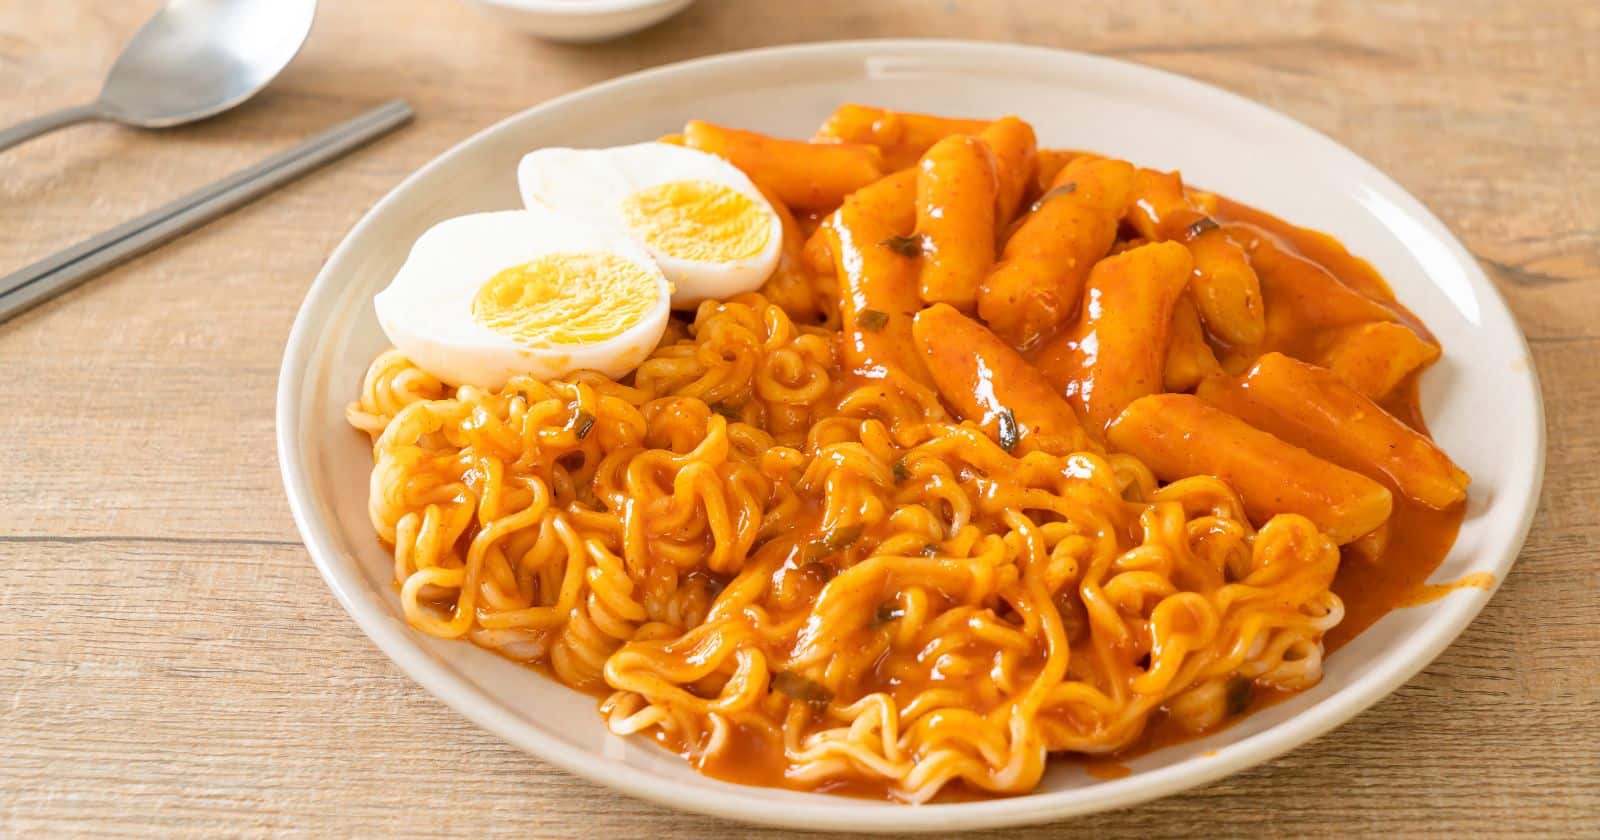 Is Rabokki Healthy? Uncovering the Nutritional Facts of This Popular Korean Dish